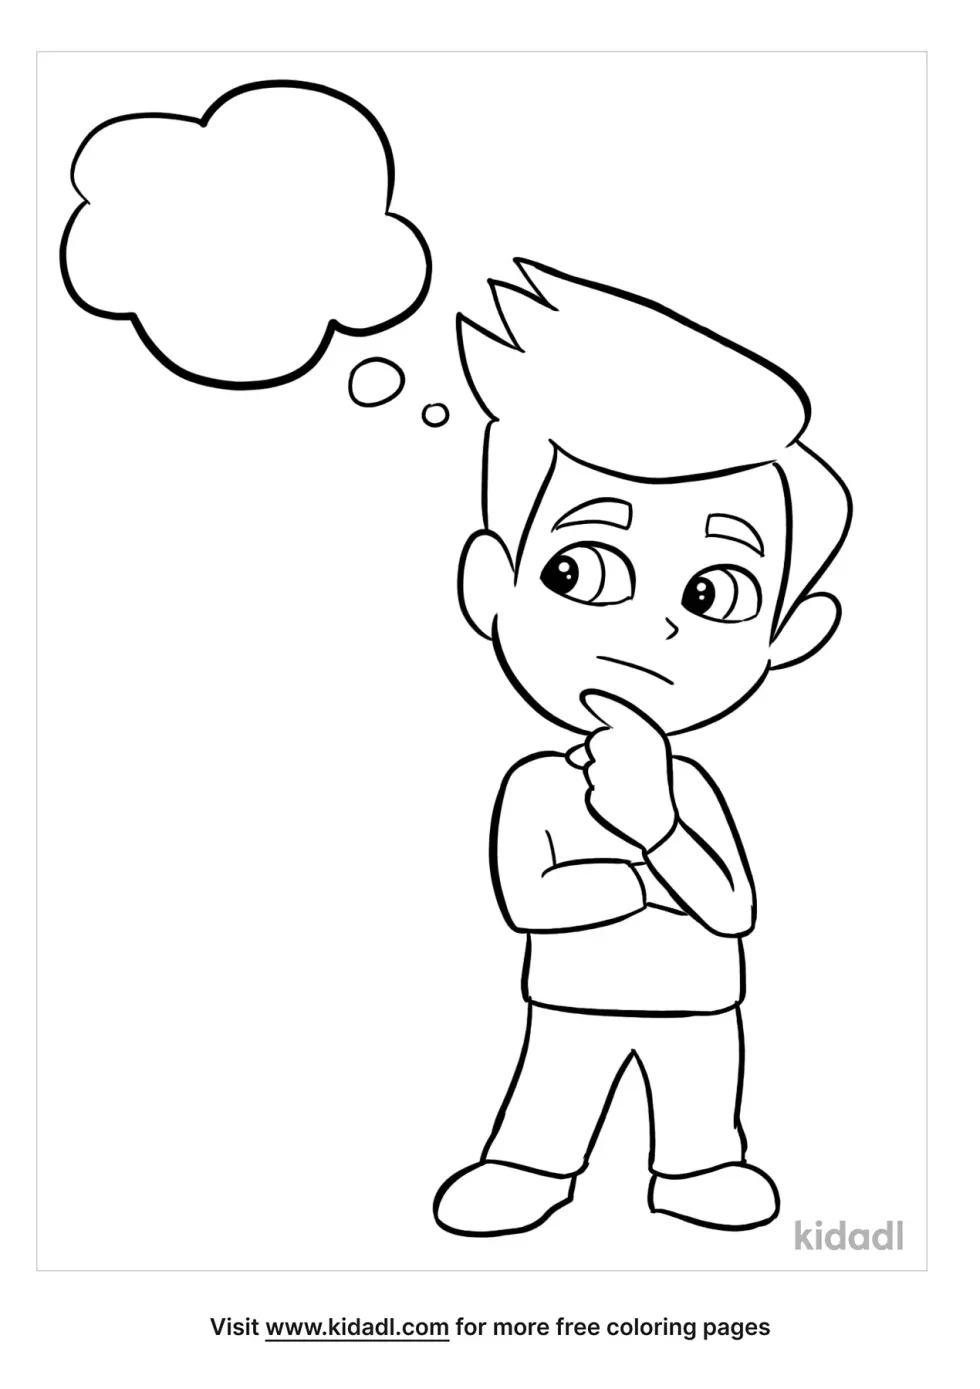 Boy In Thought Bubble Coloring Page